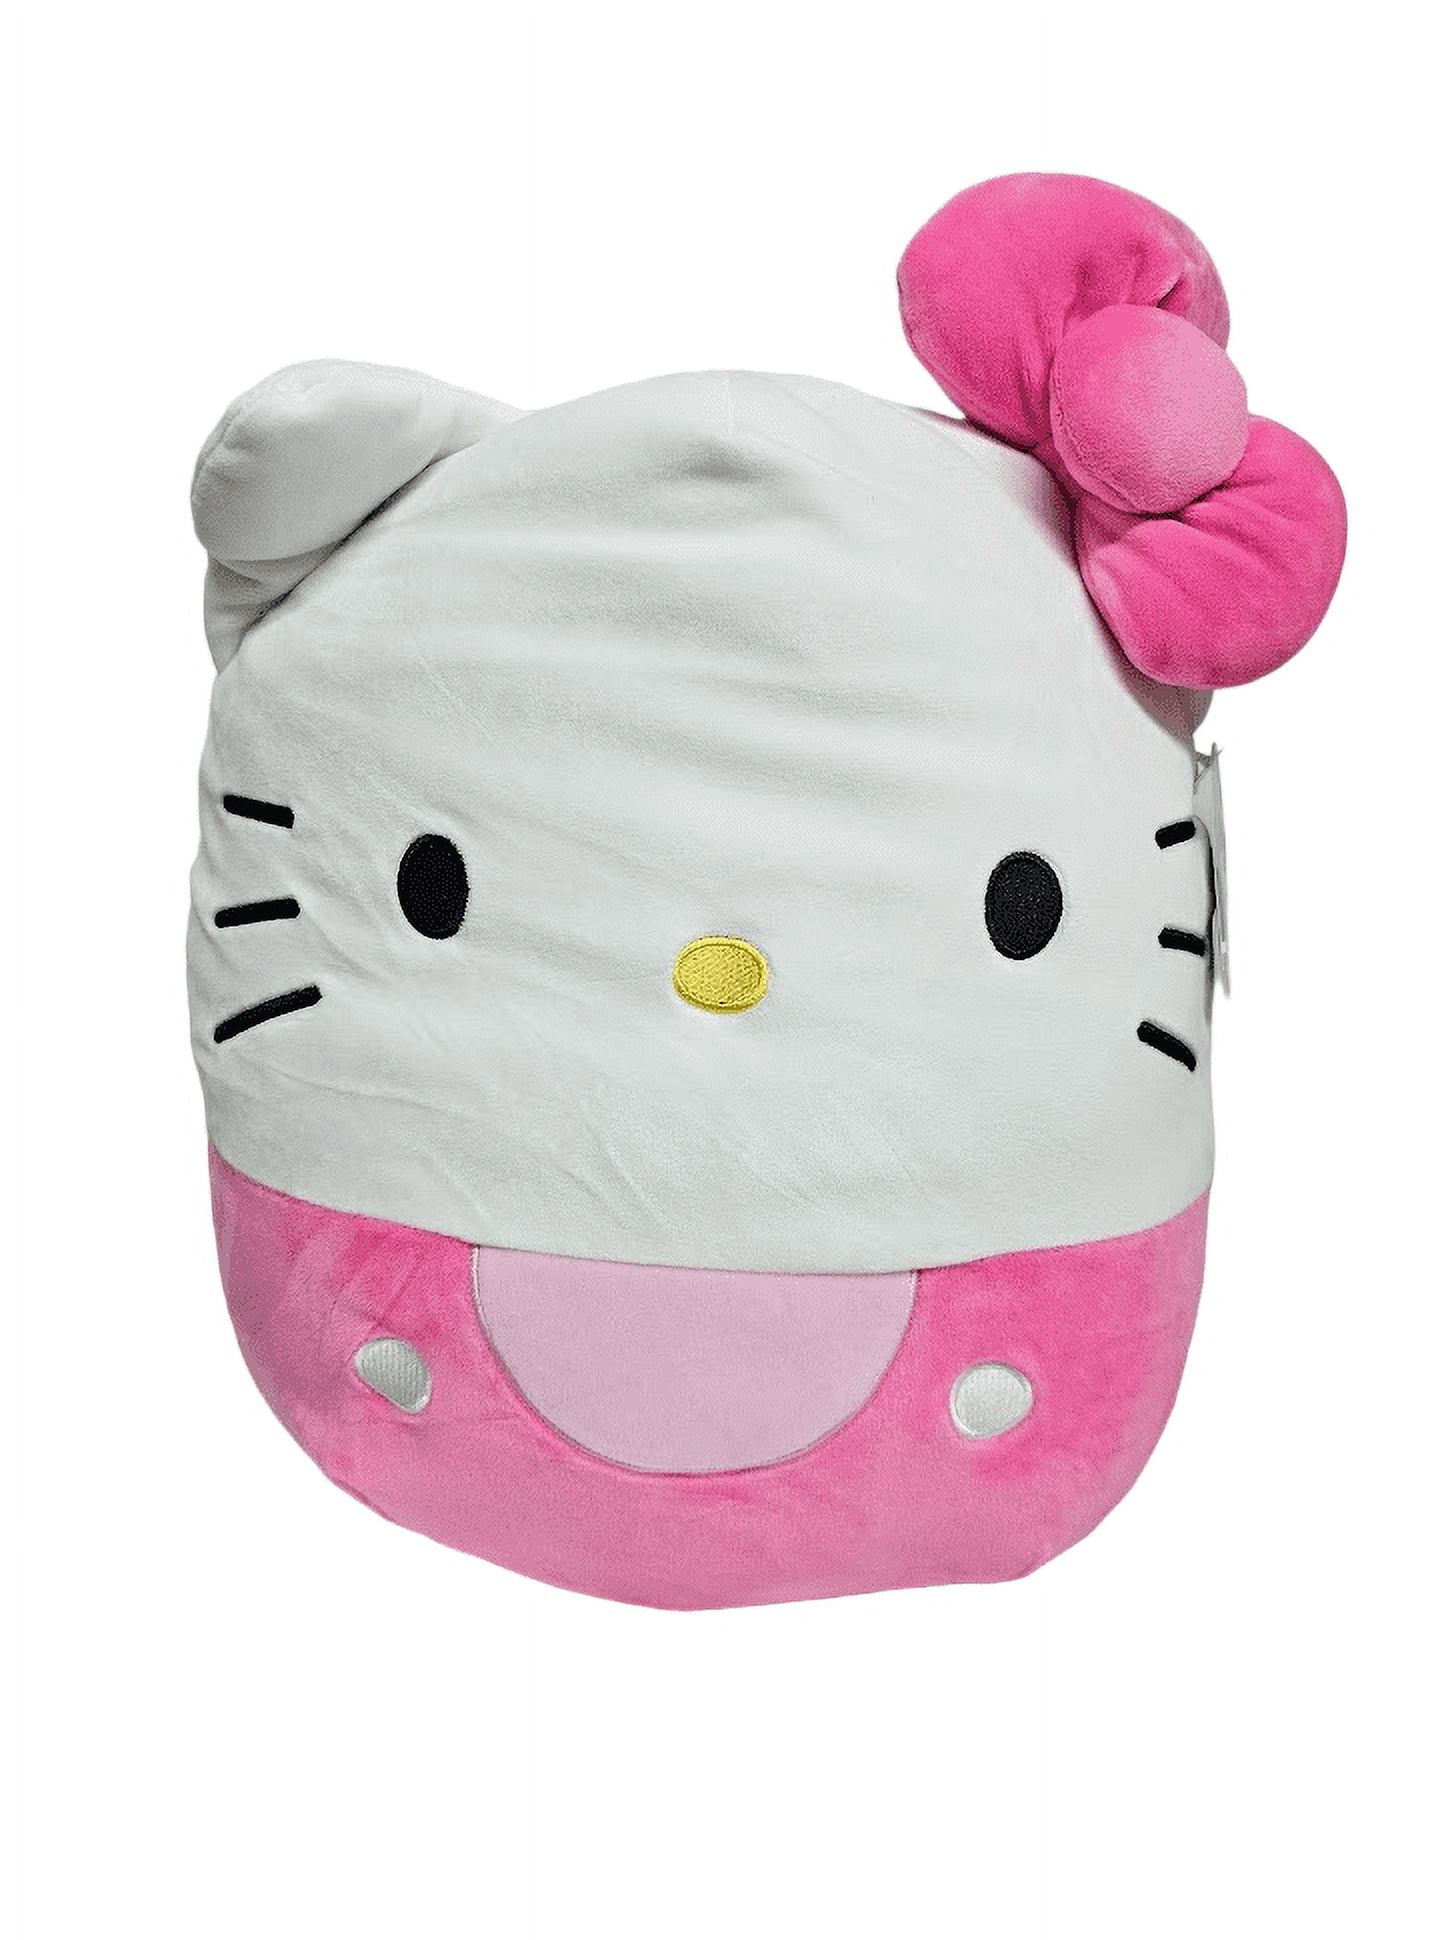 Squishmallow Official Kellytoys 14 inch Hello Kitty with Pink Outfit and Bow Sanrio Ultimate Soft Plush Stuffed Toy